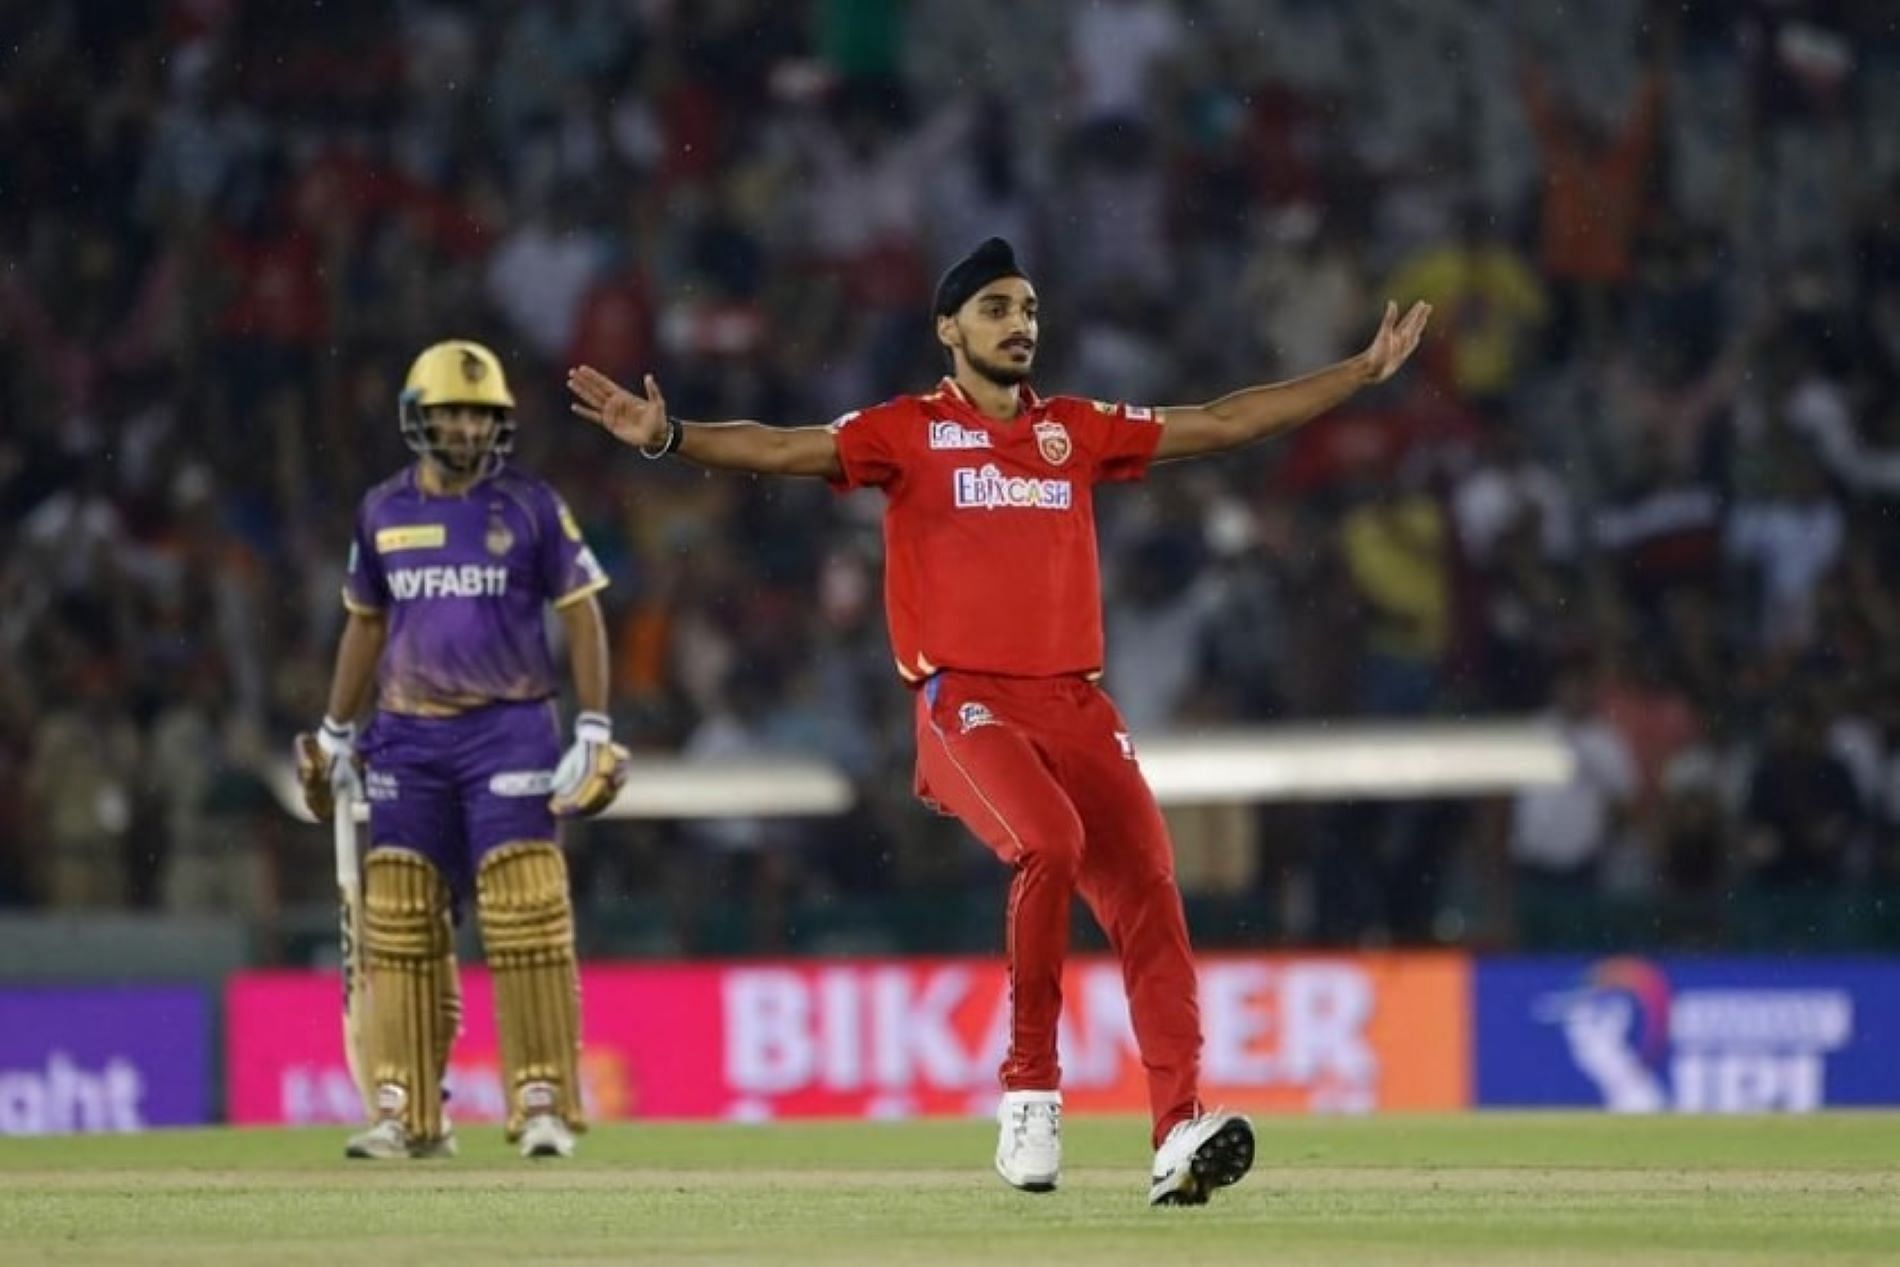 Arshdeep Singh made a dream start to his IPL with two wickets in his first over.